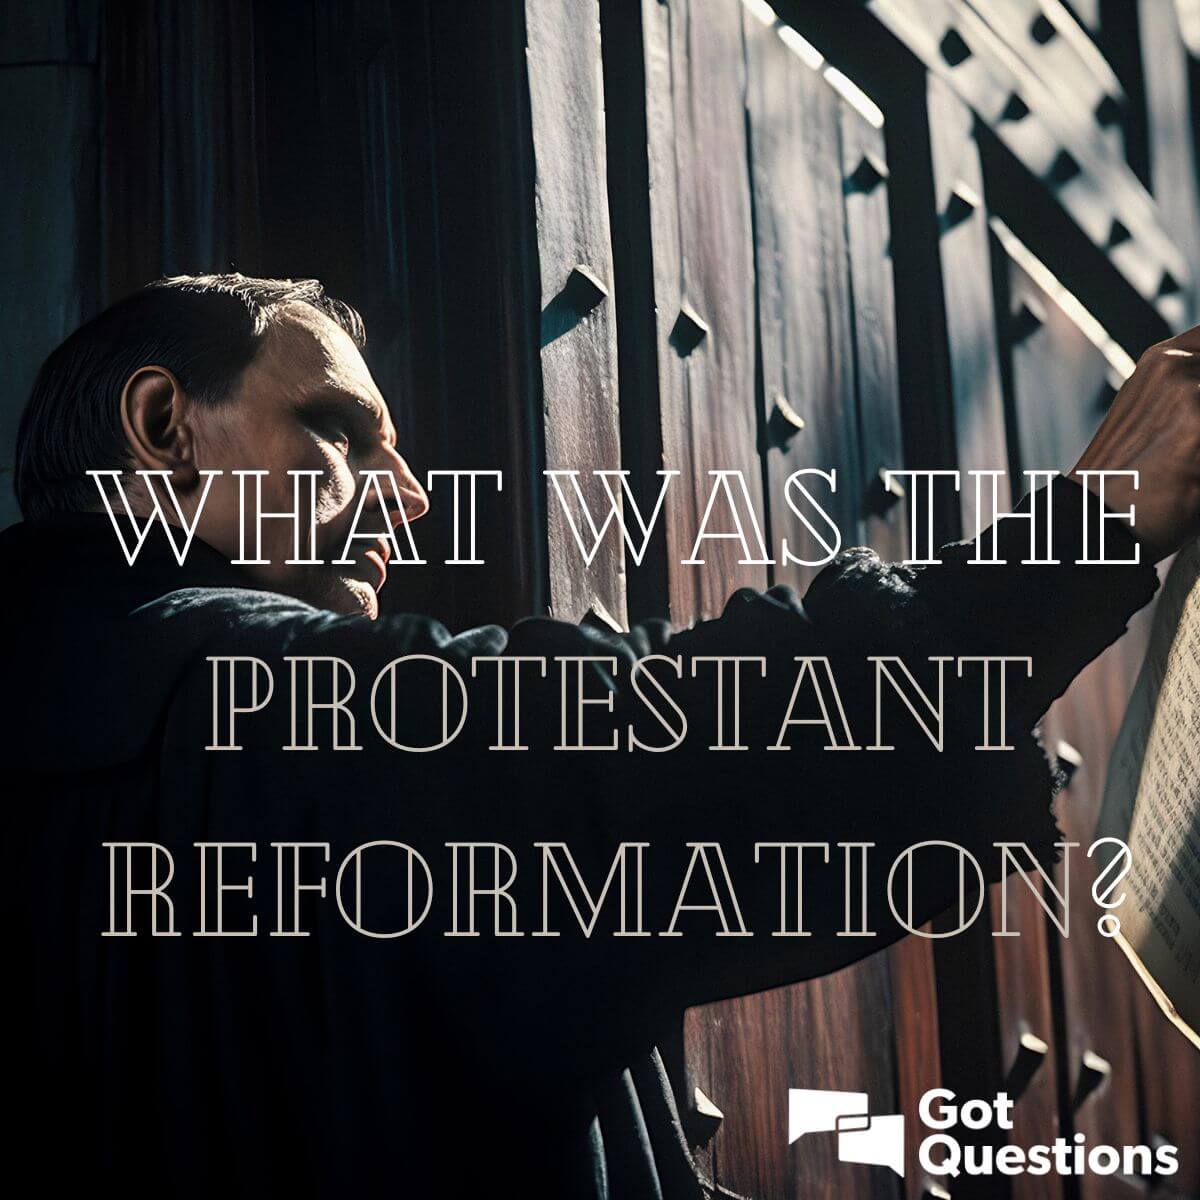 Where did the Reformation begin?